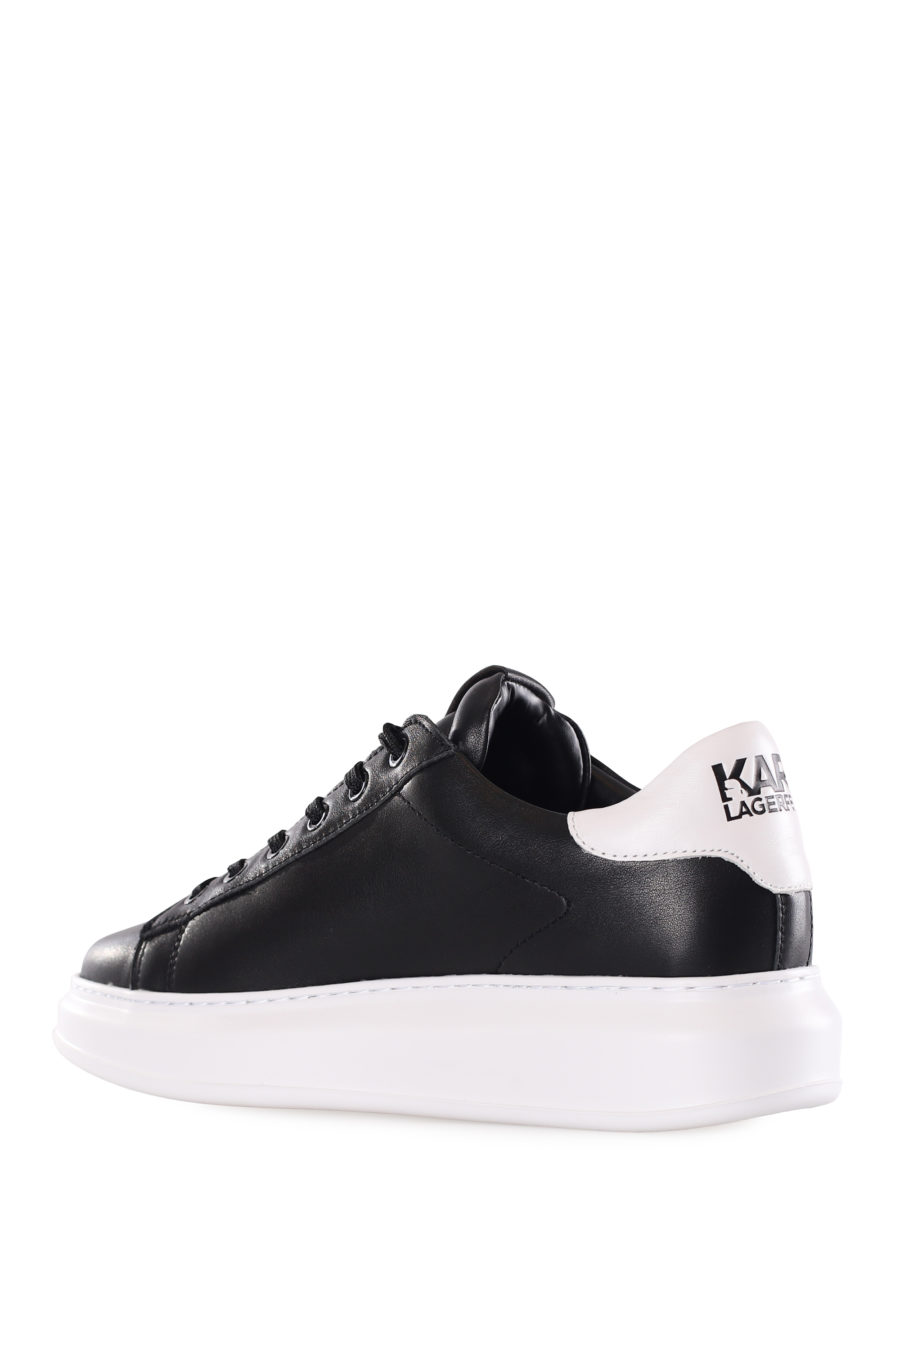 Black trainers with rubber "karl" logo - IMG 9555